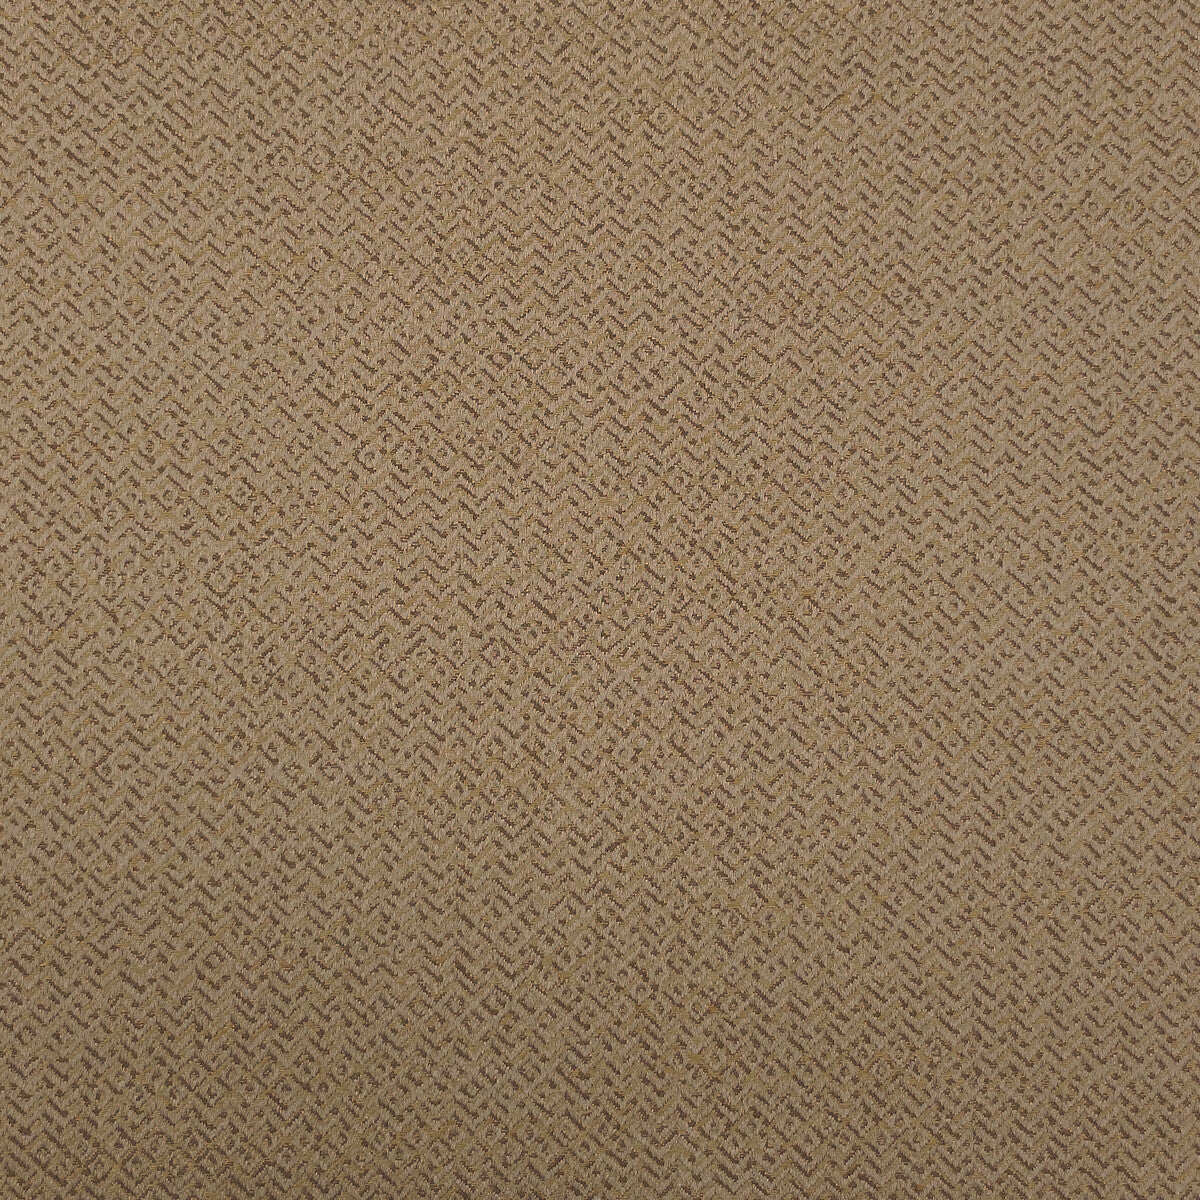 Kf Des fabric - pattern LZ-30203.05.0 - by Kravet Design in the Lizzo collection